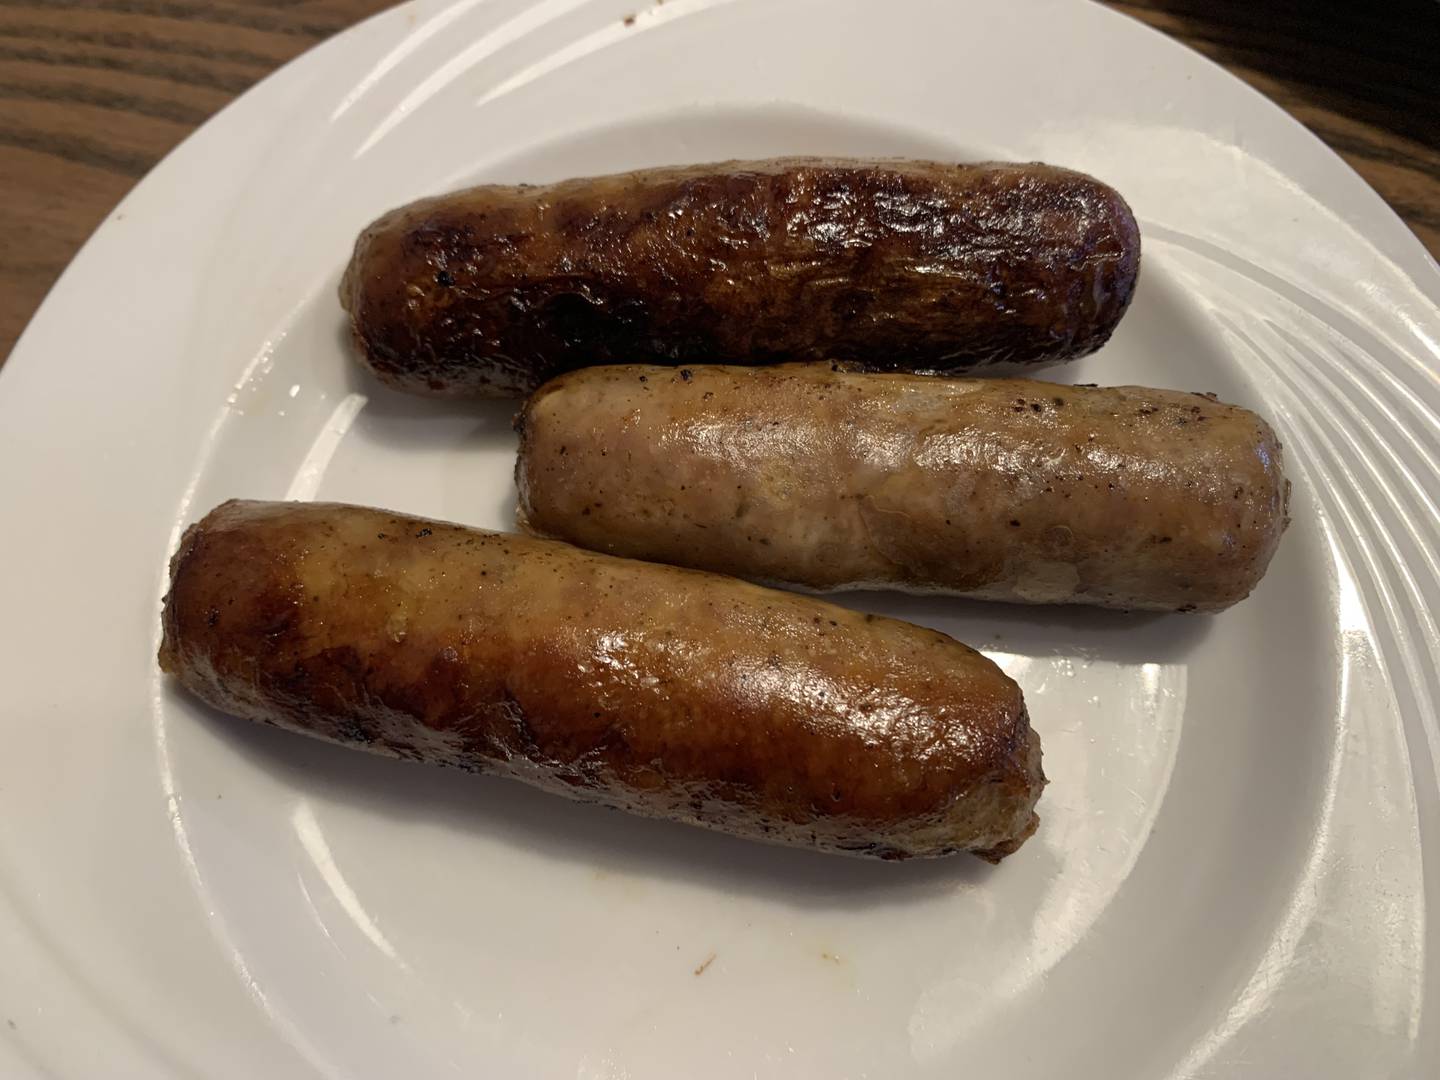 Eggville Cafe in Cary serves large sausages as a breakfast side.